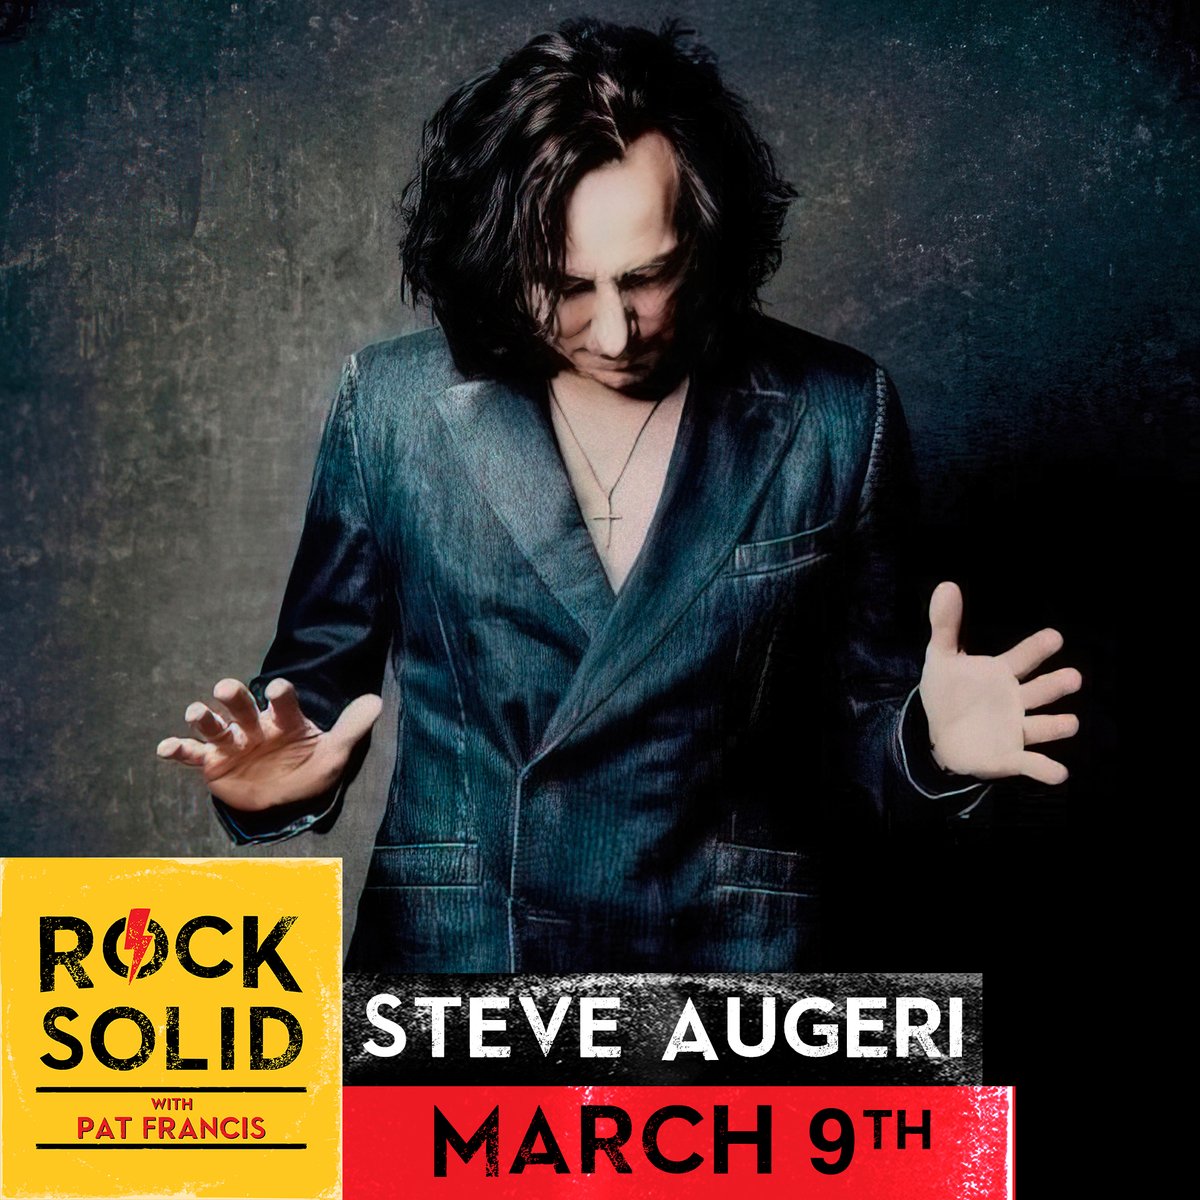 Thursday... Hey @JourneyOfficial fans @StevenAugeri finally appears on the show this week!!!